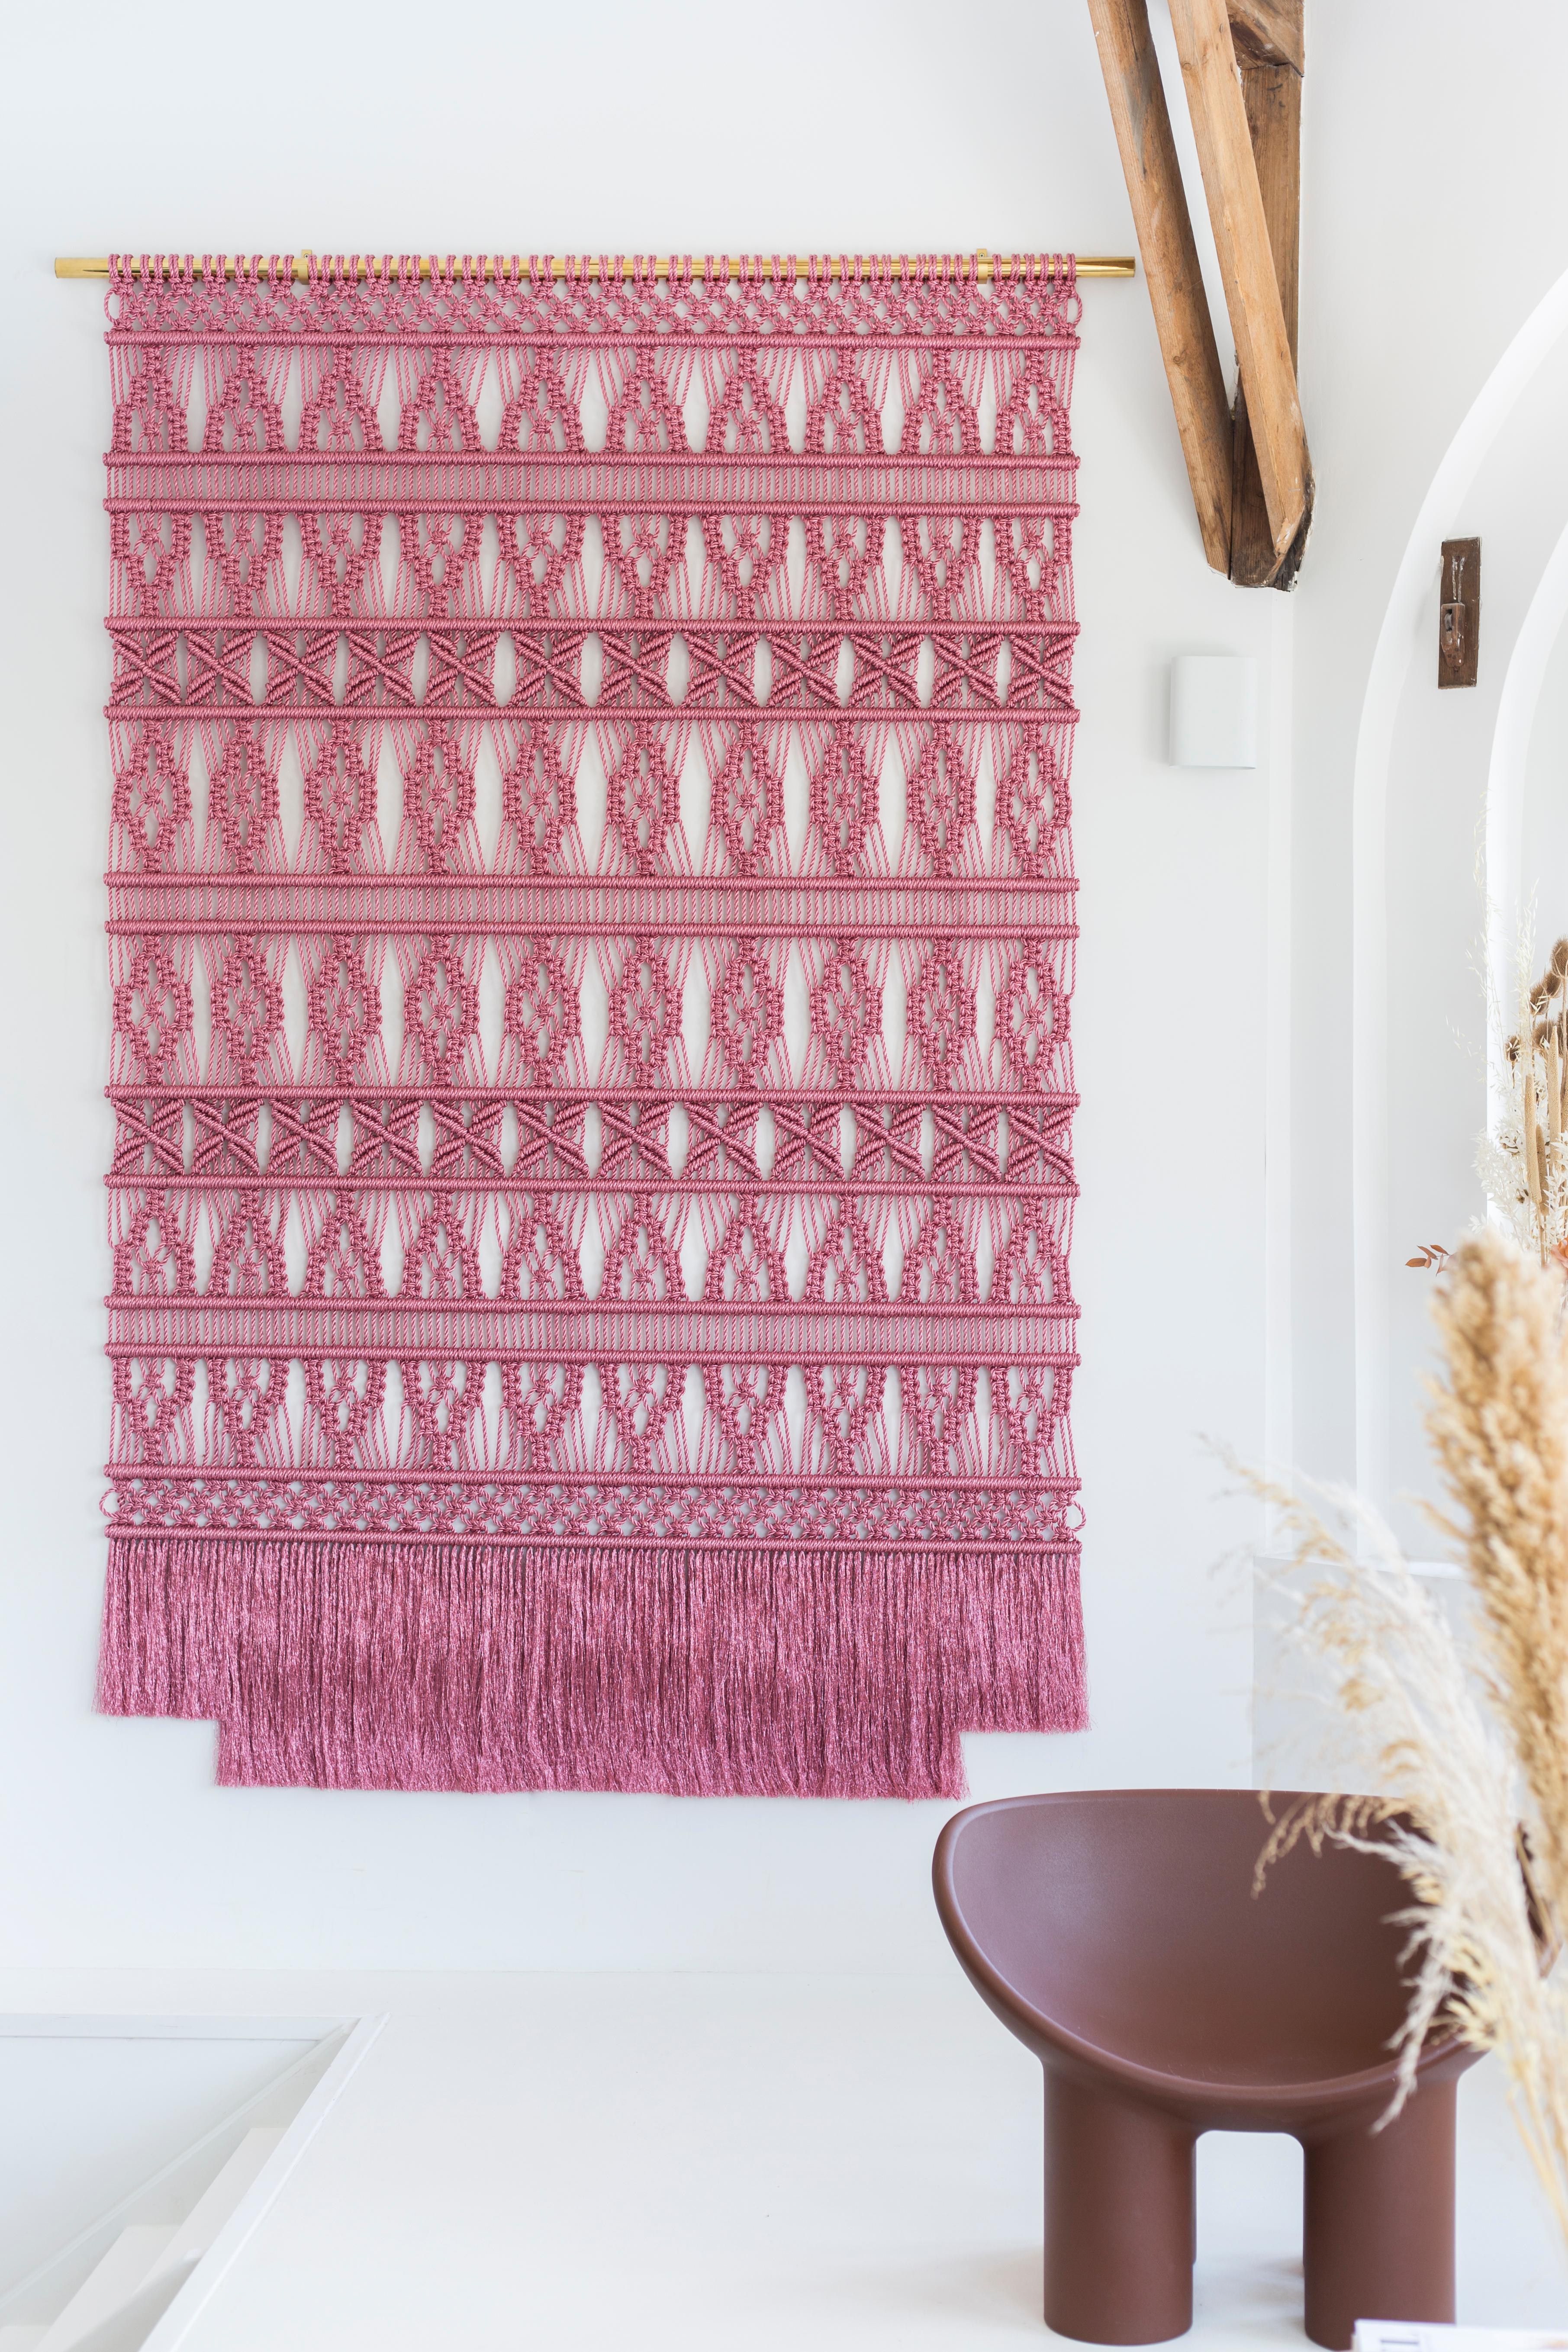 WallHanging Pink Metallic, Rope Art, Wall Art, Fiber Art, Wall Tapestry, macrame In New Condition For Sale In Bennebroek, NL